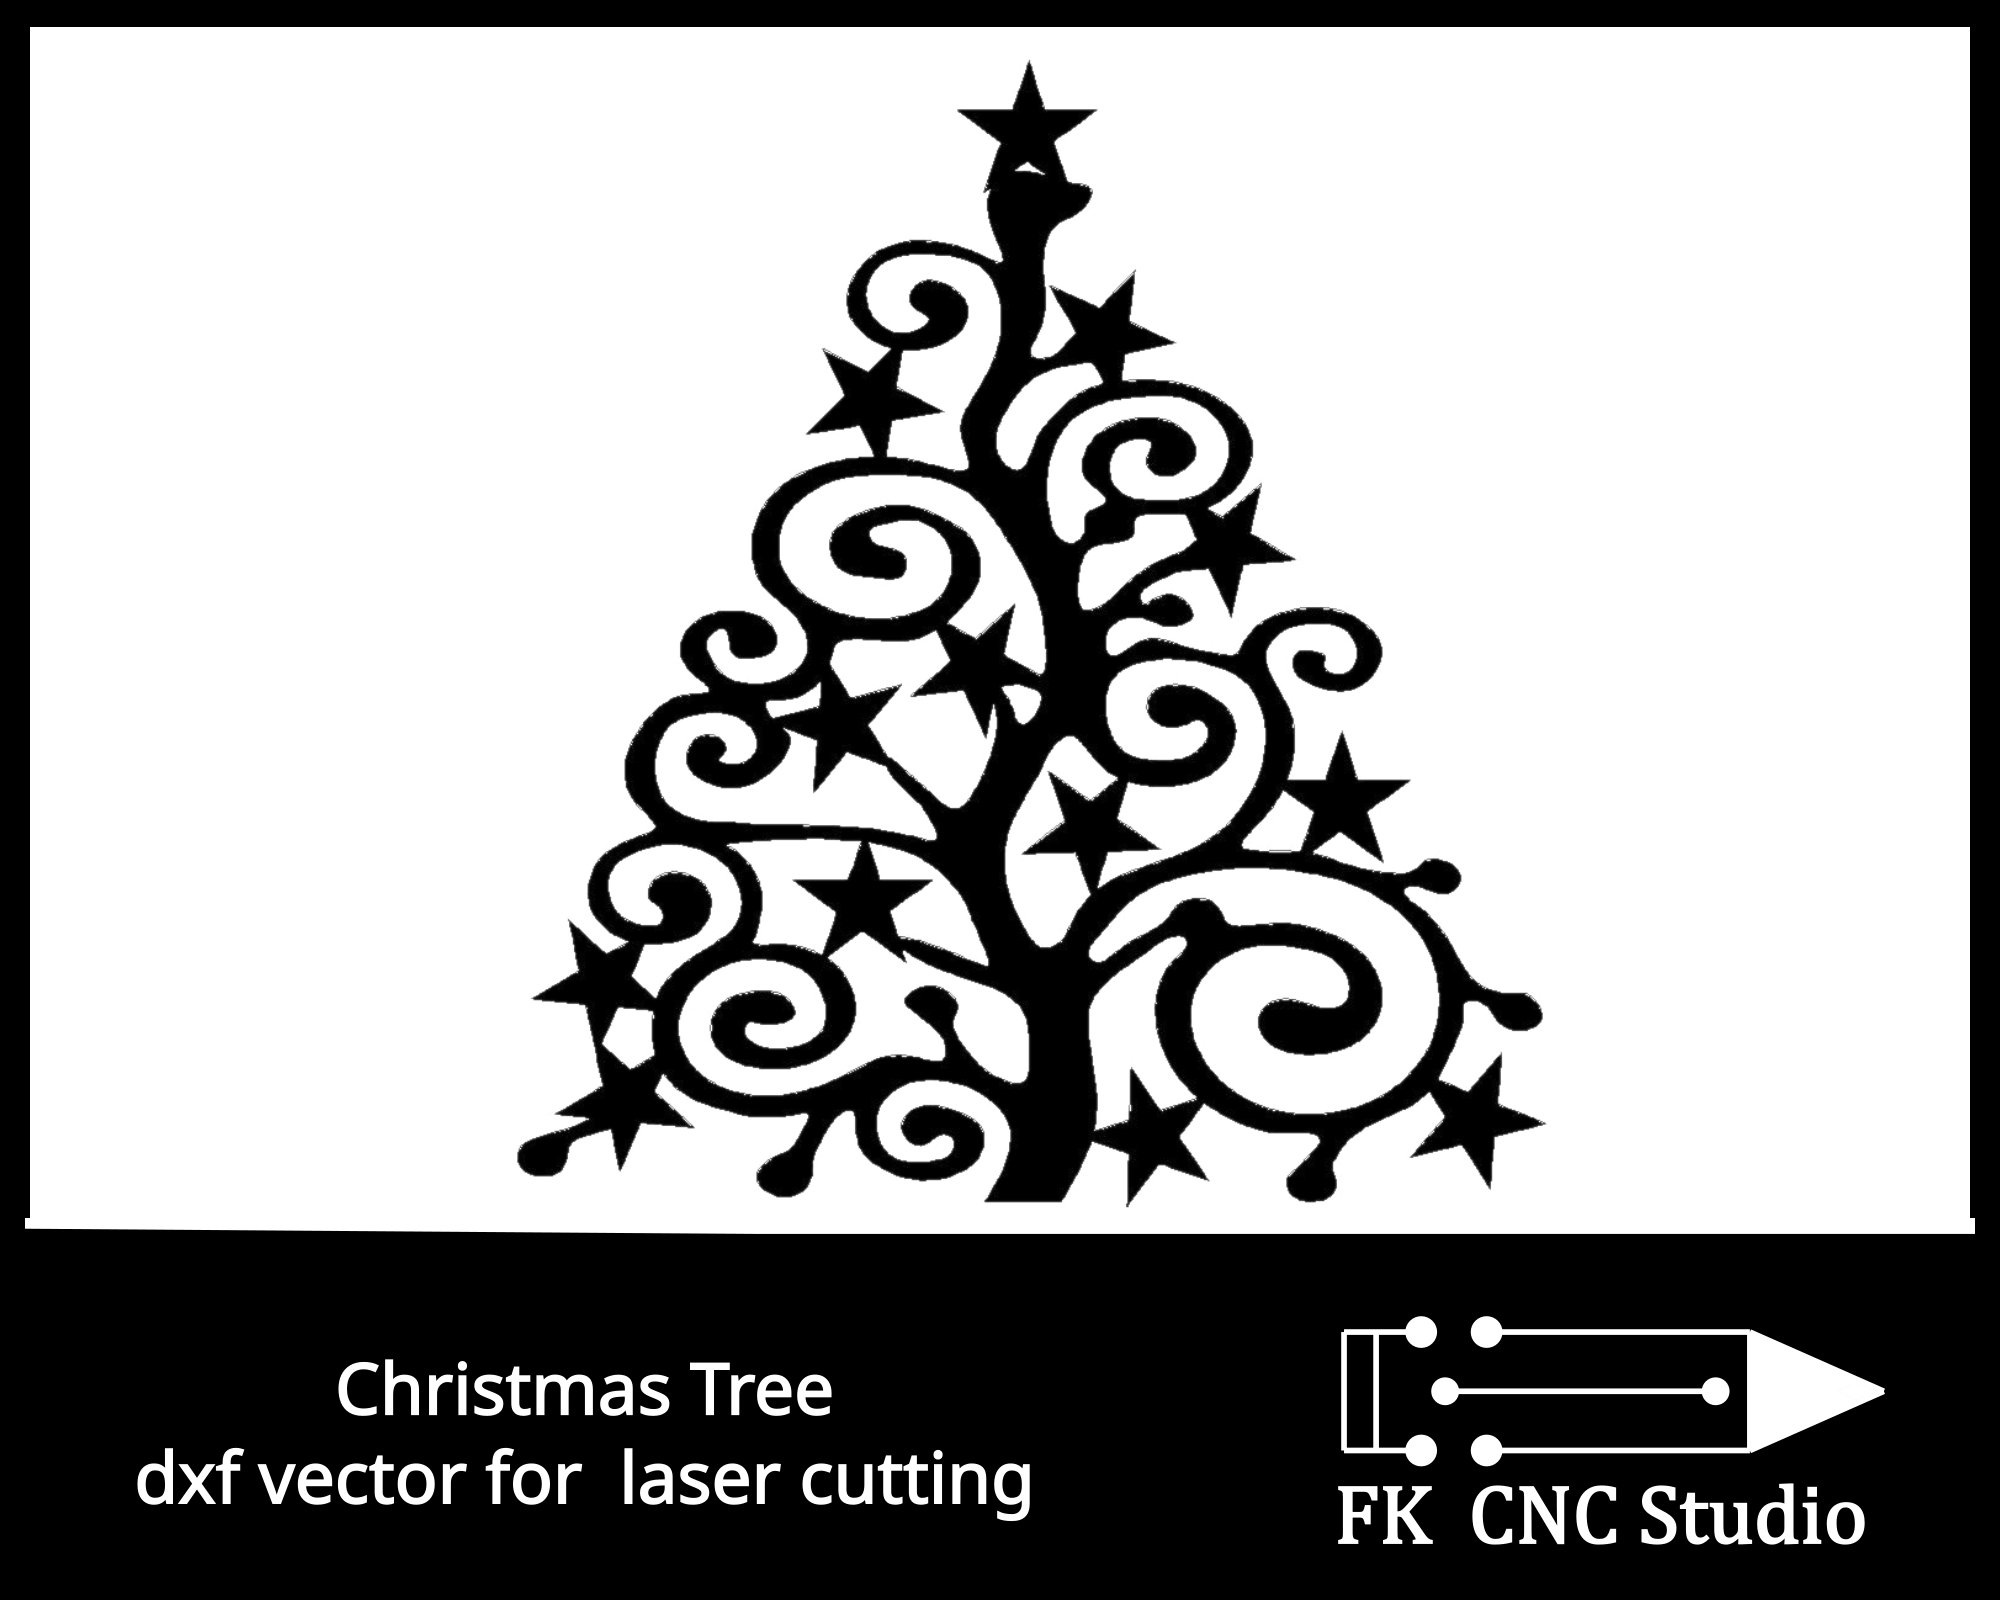 Christmas toy DXF and CDR File for CNC Laser Plasma or Water Jet Router Cut 